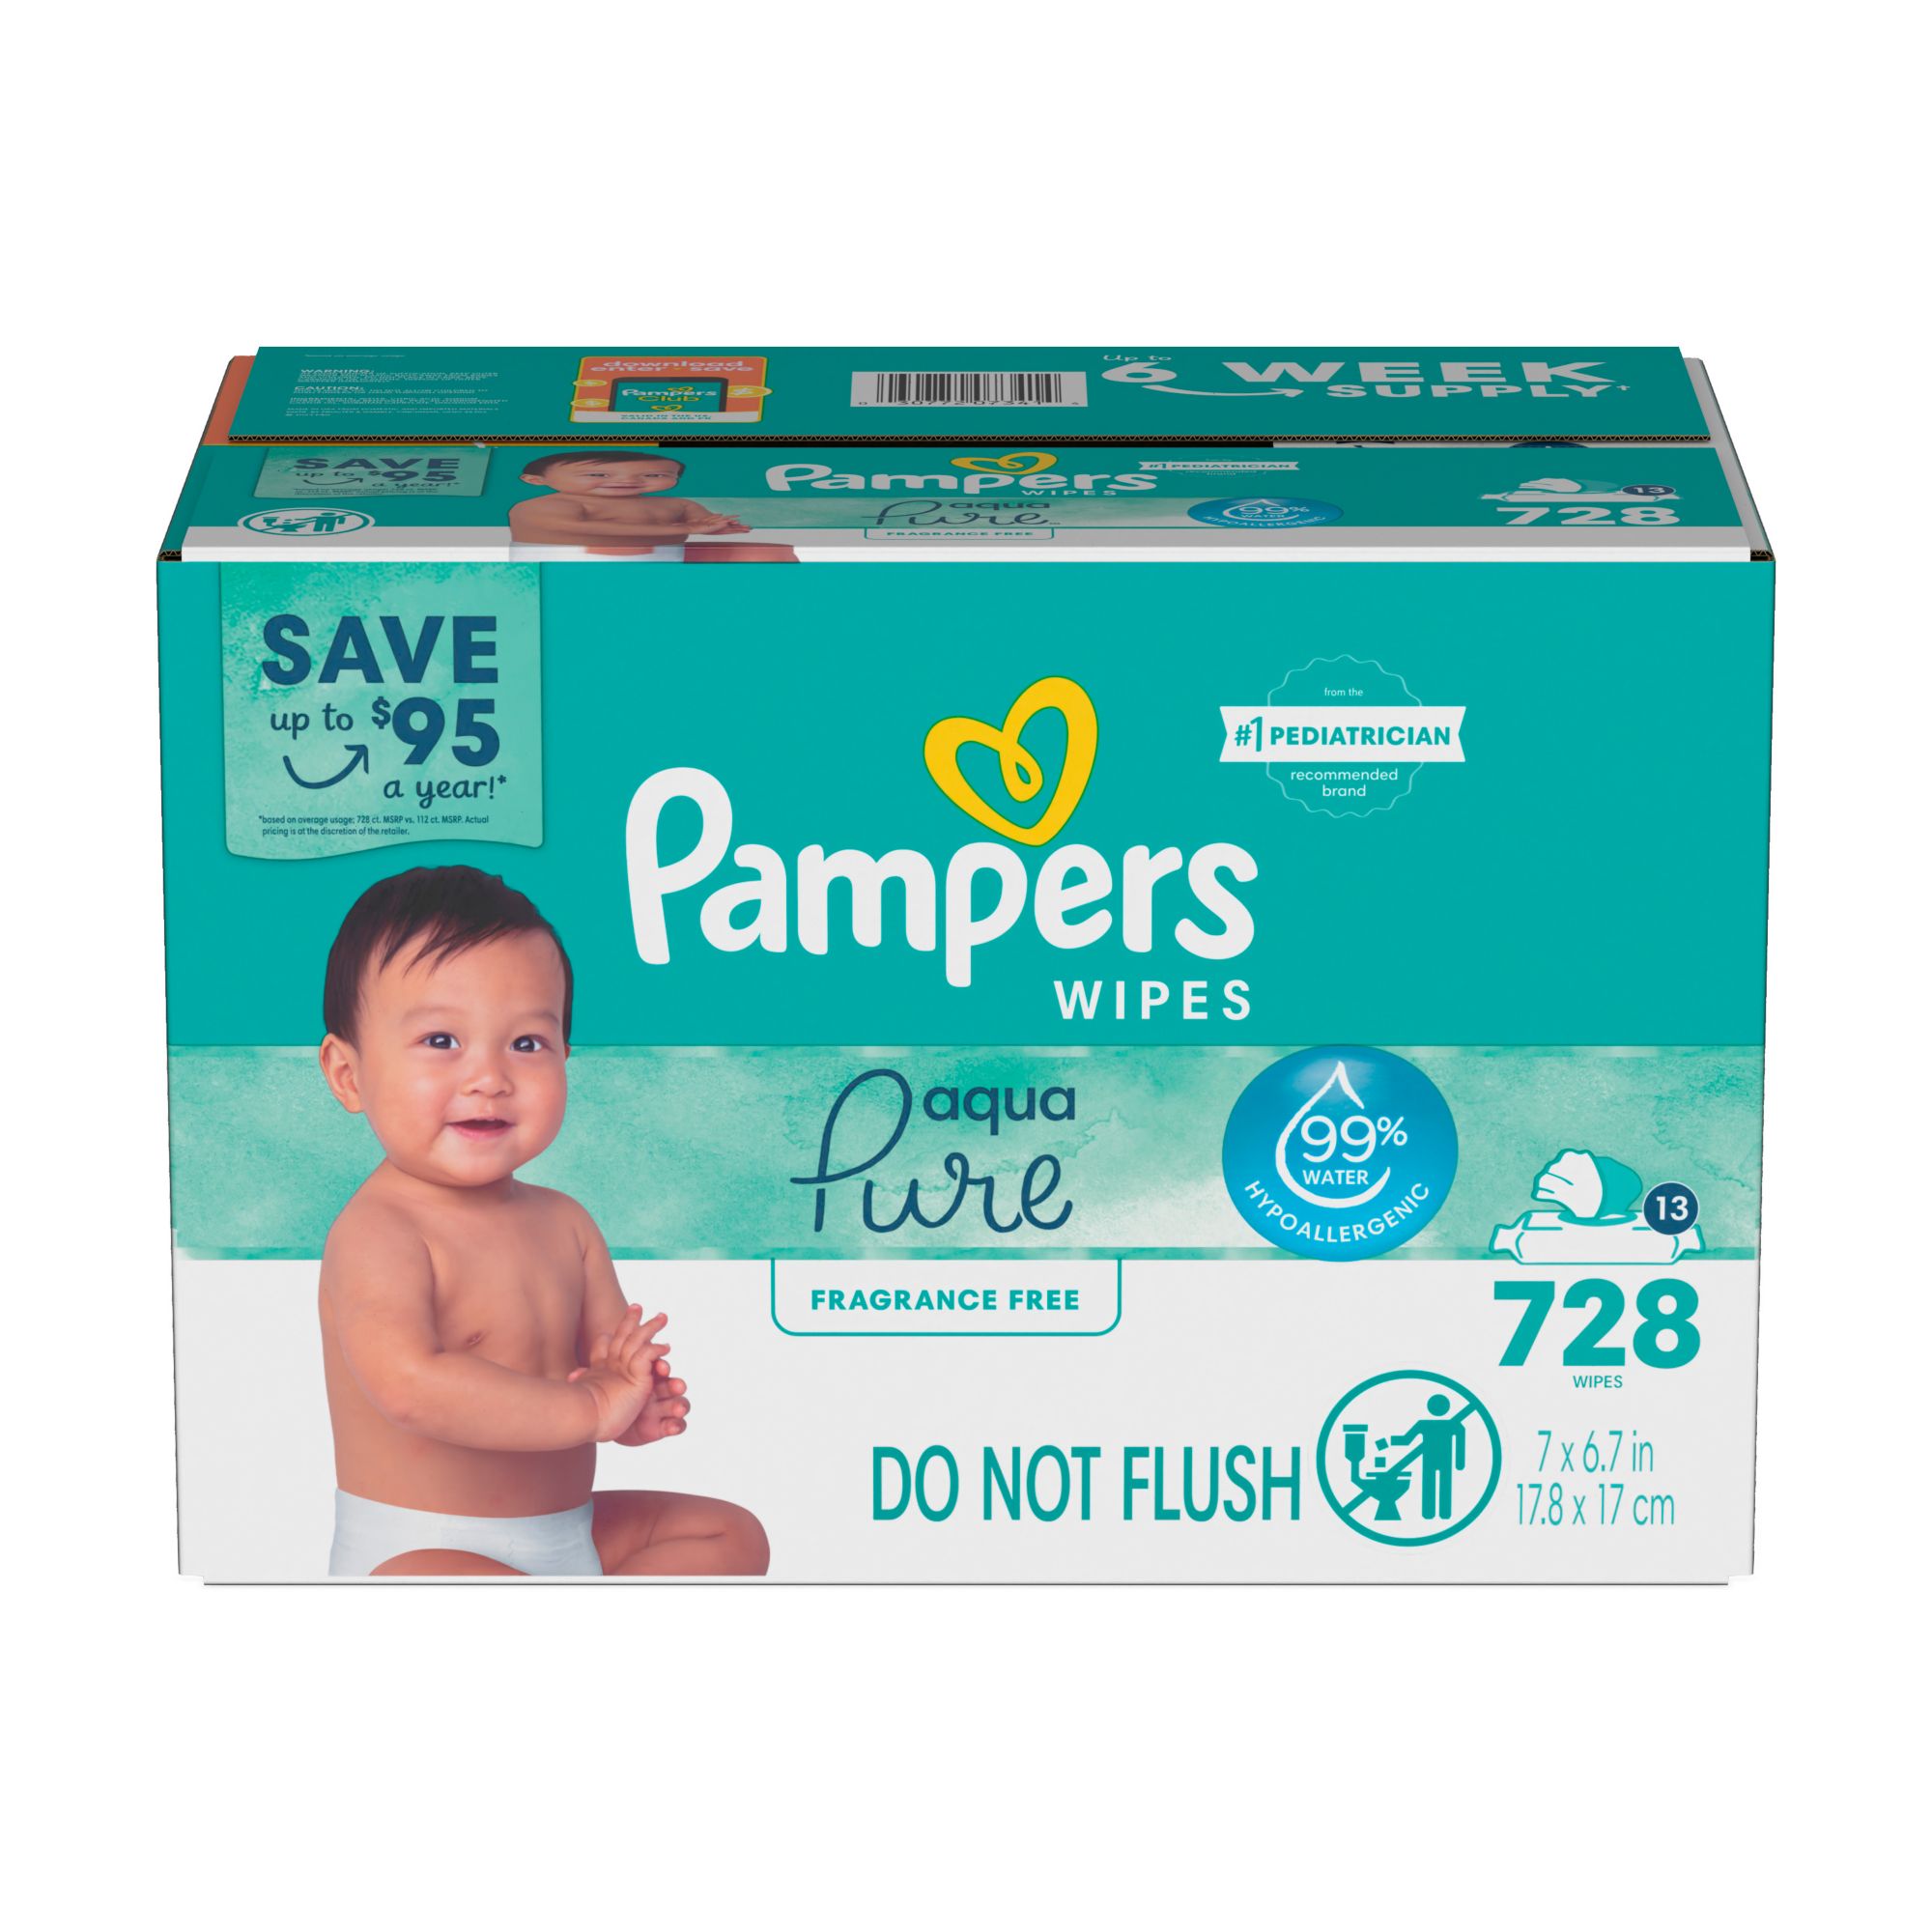 Pampers Aqua Pure Sensitive Water Baby Diaper Wipes, Hypoallergenic, 56  Count (Pack of 12) 